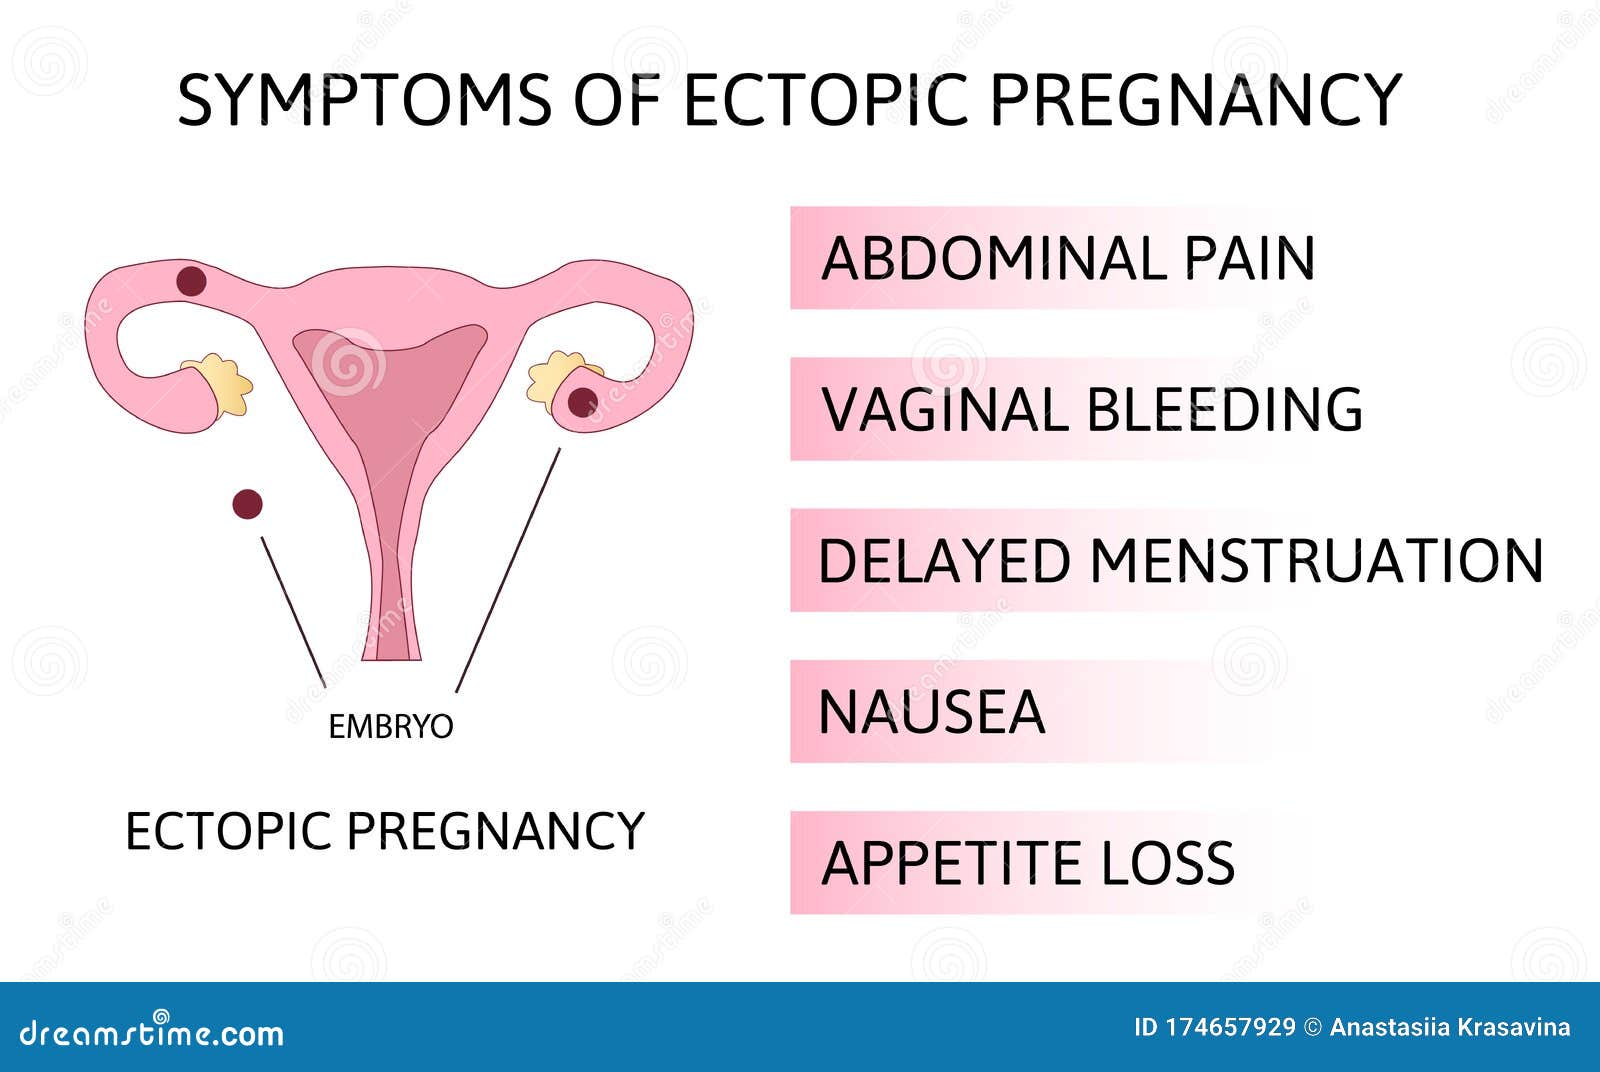 Signs and symptoms of Ectopic pregnancy